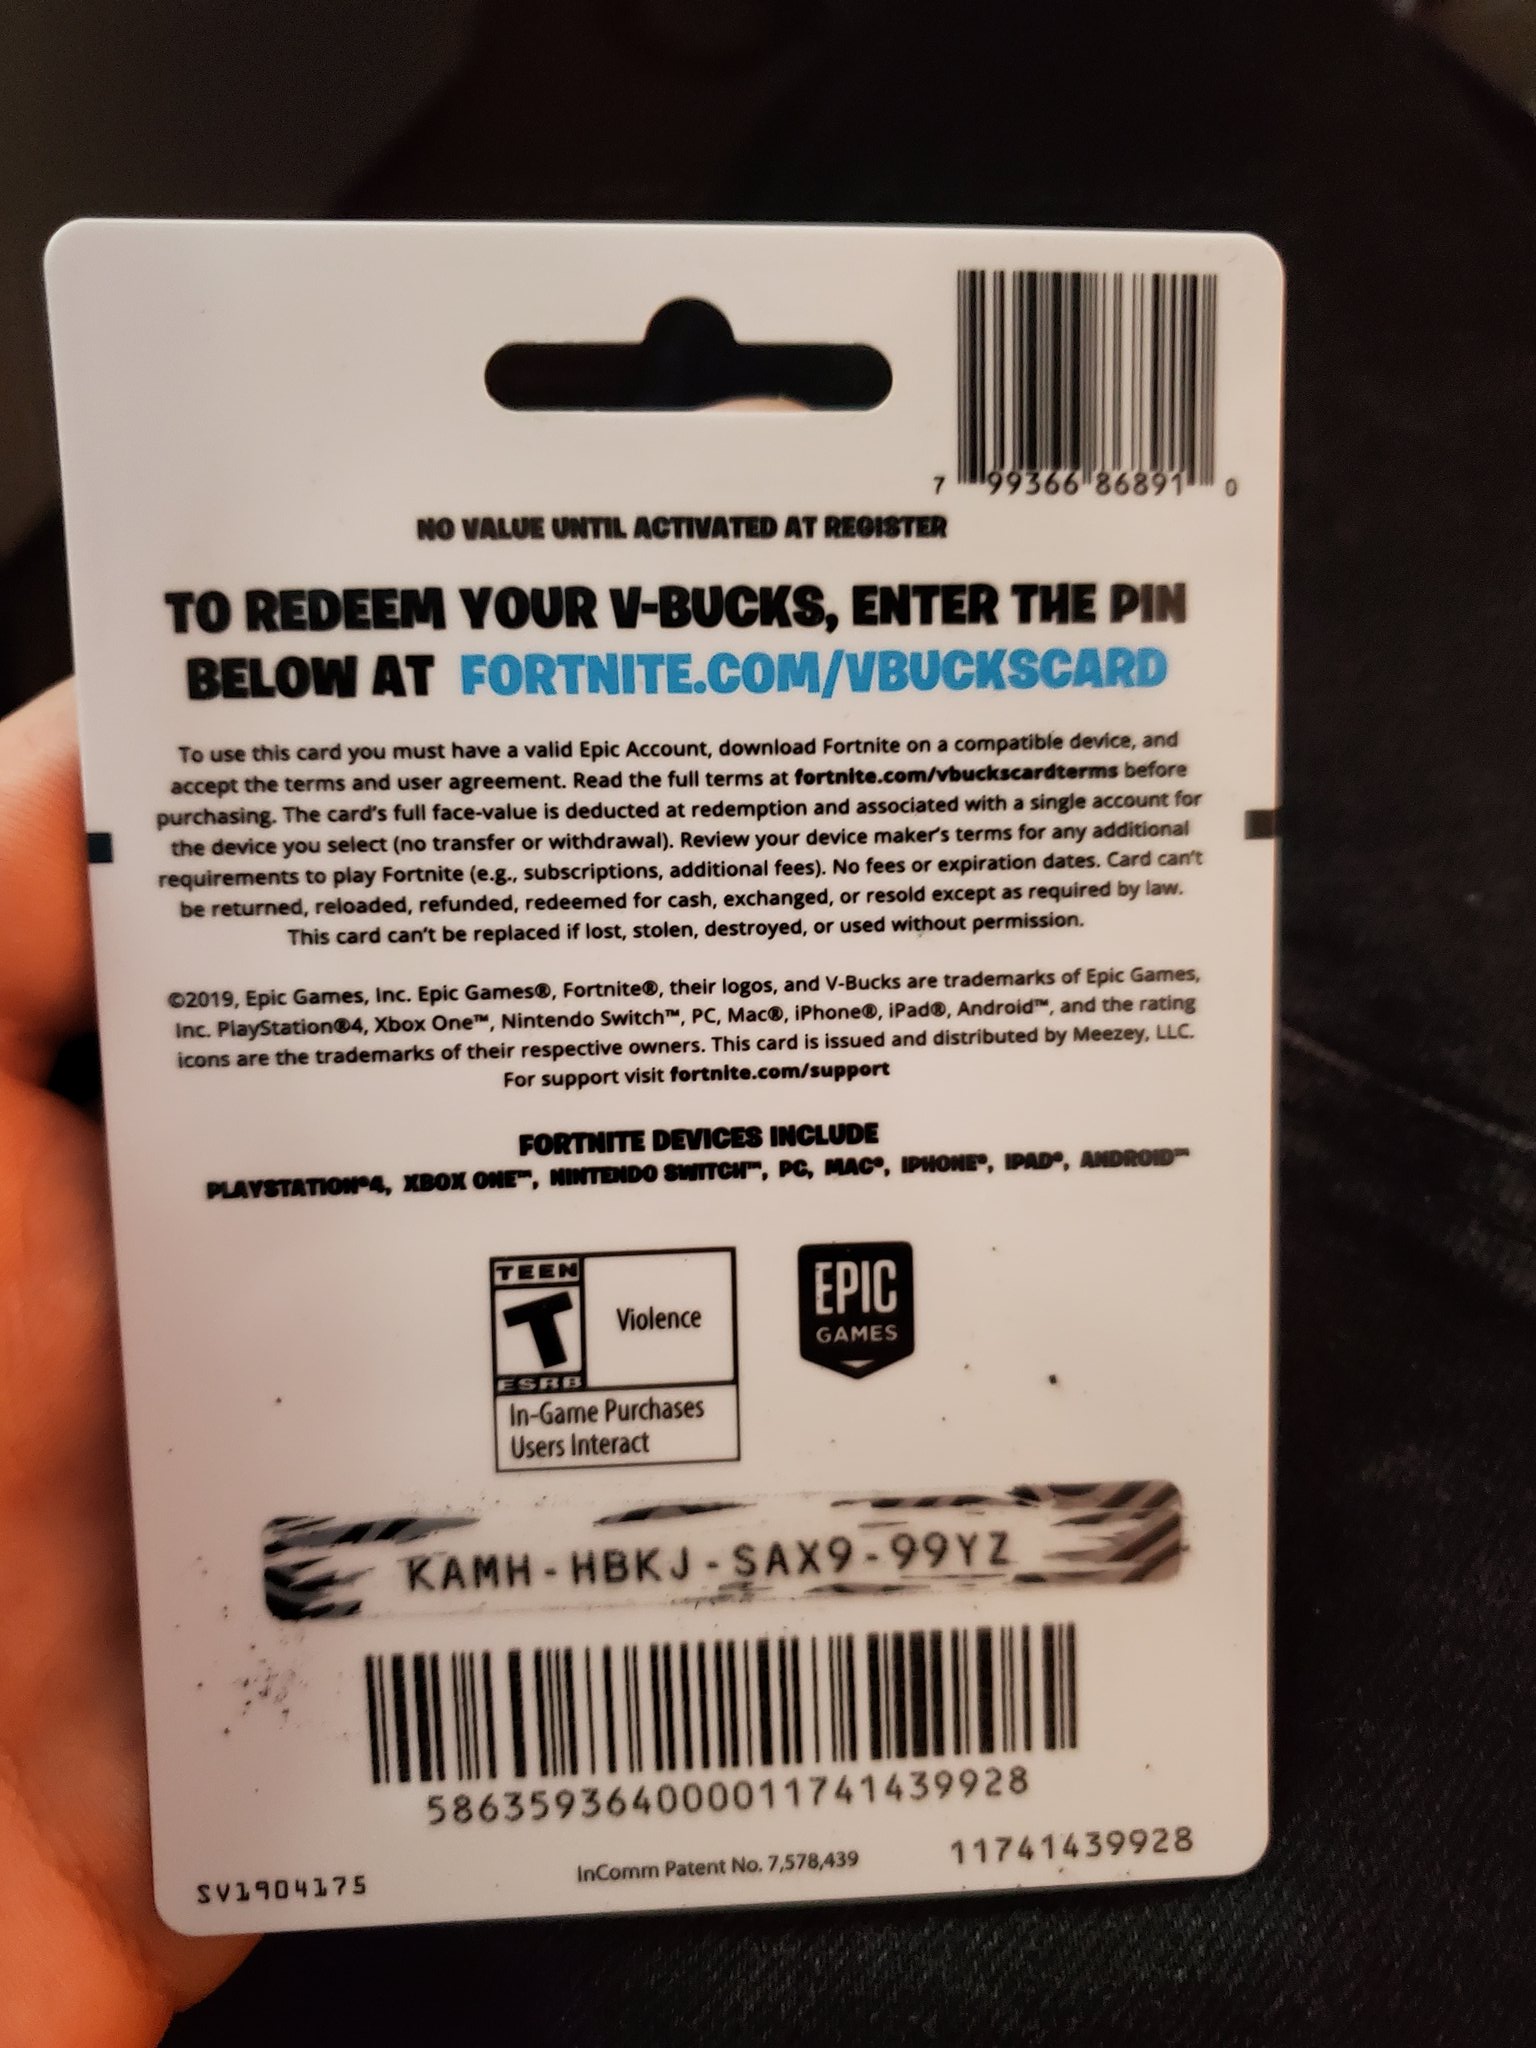 54 Top Photos Fortnite Redeem Ps4 Code On Pc Hey Everyone Got A